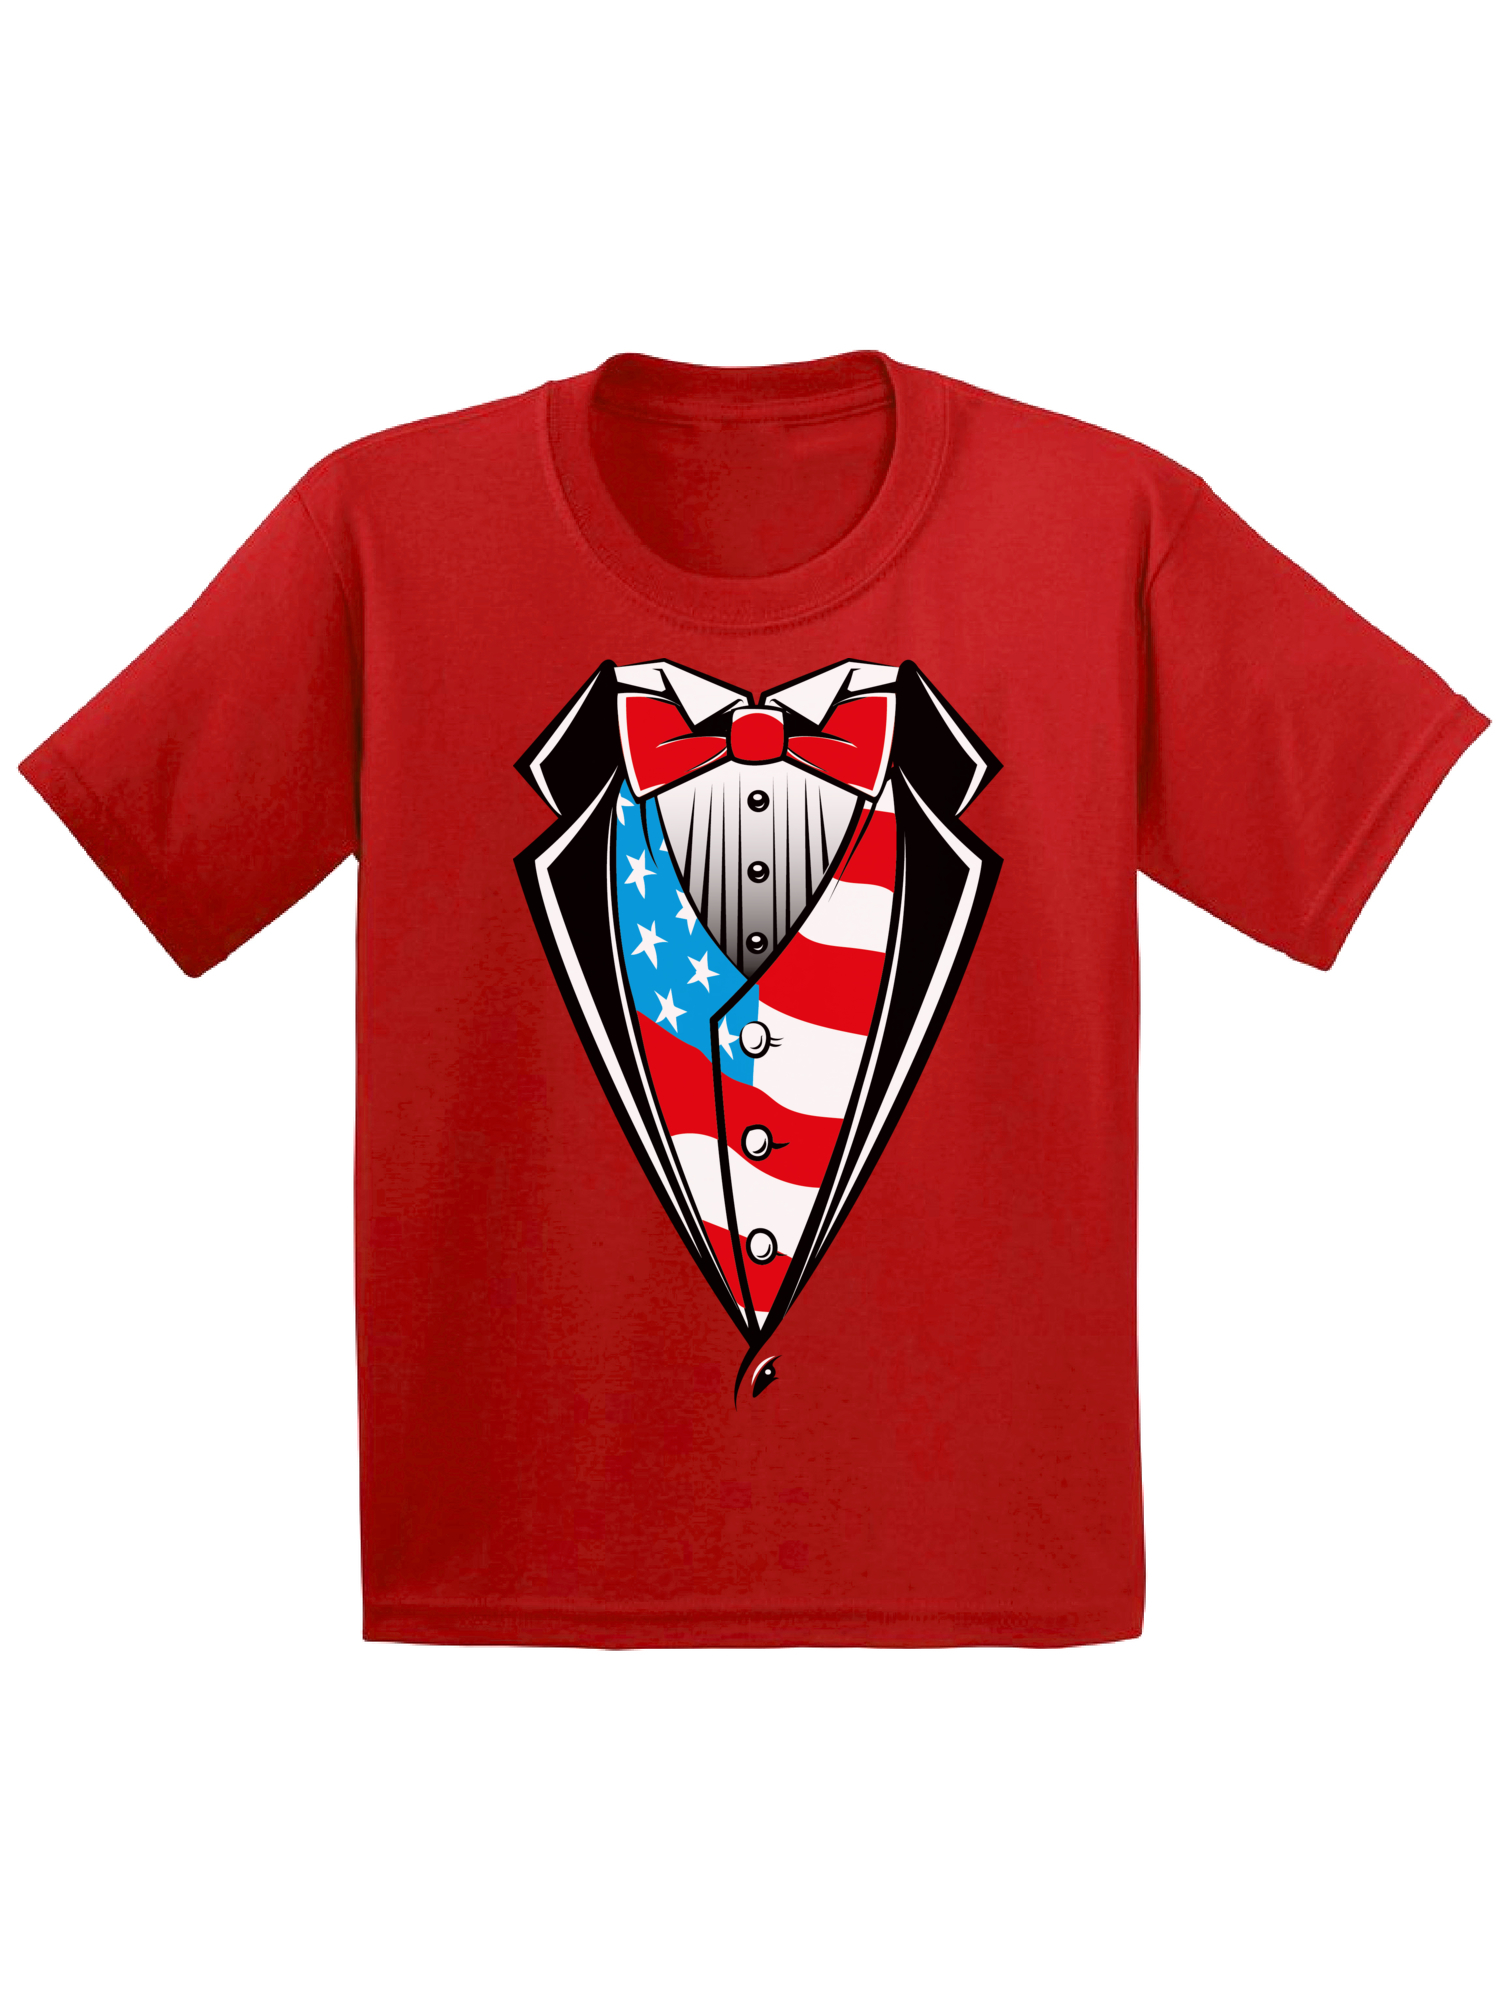 Awkward Styles American Tuxedo Toddler Shirt 4th July Party Patriotic Kids T shirt 4th of July Tshirt for Boys and Girls USA Kids T-shirt 4th of July Shirts for Boys 4th of July Shirts for Girls - image 1 of 4